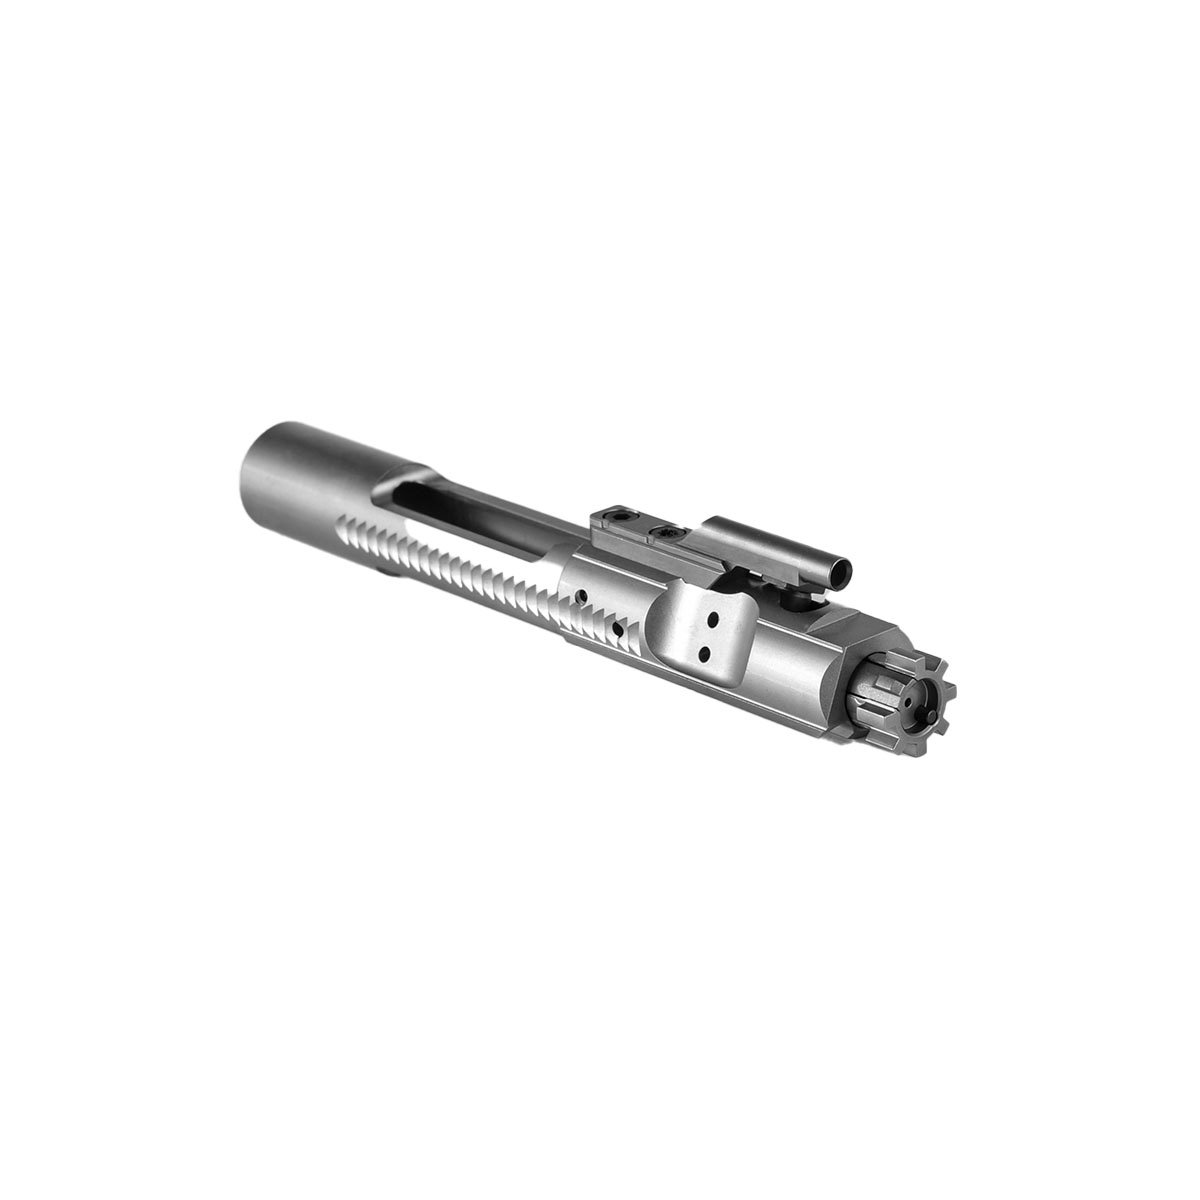 BROWNELLS - M16 5.56 BOLT CARRIER GROUP NICKEL BORON MP